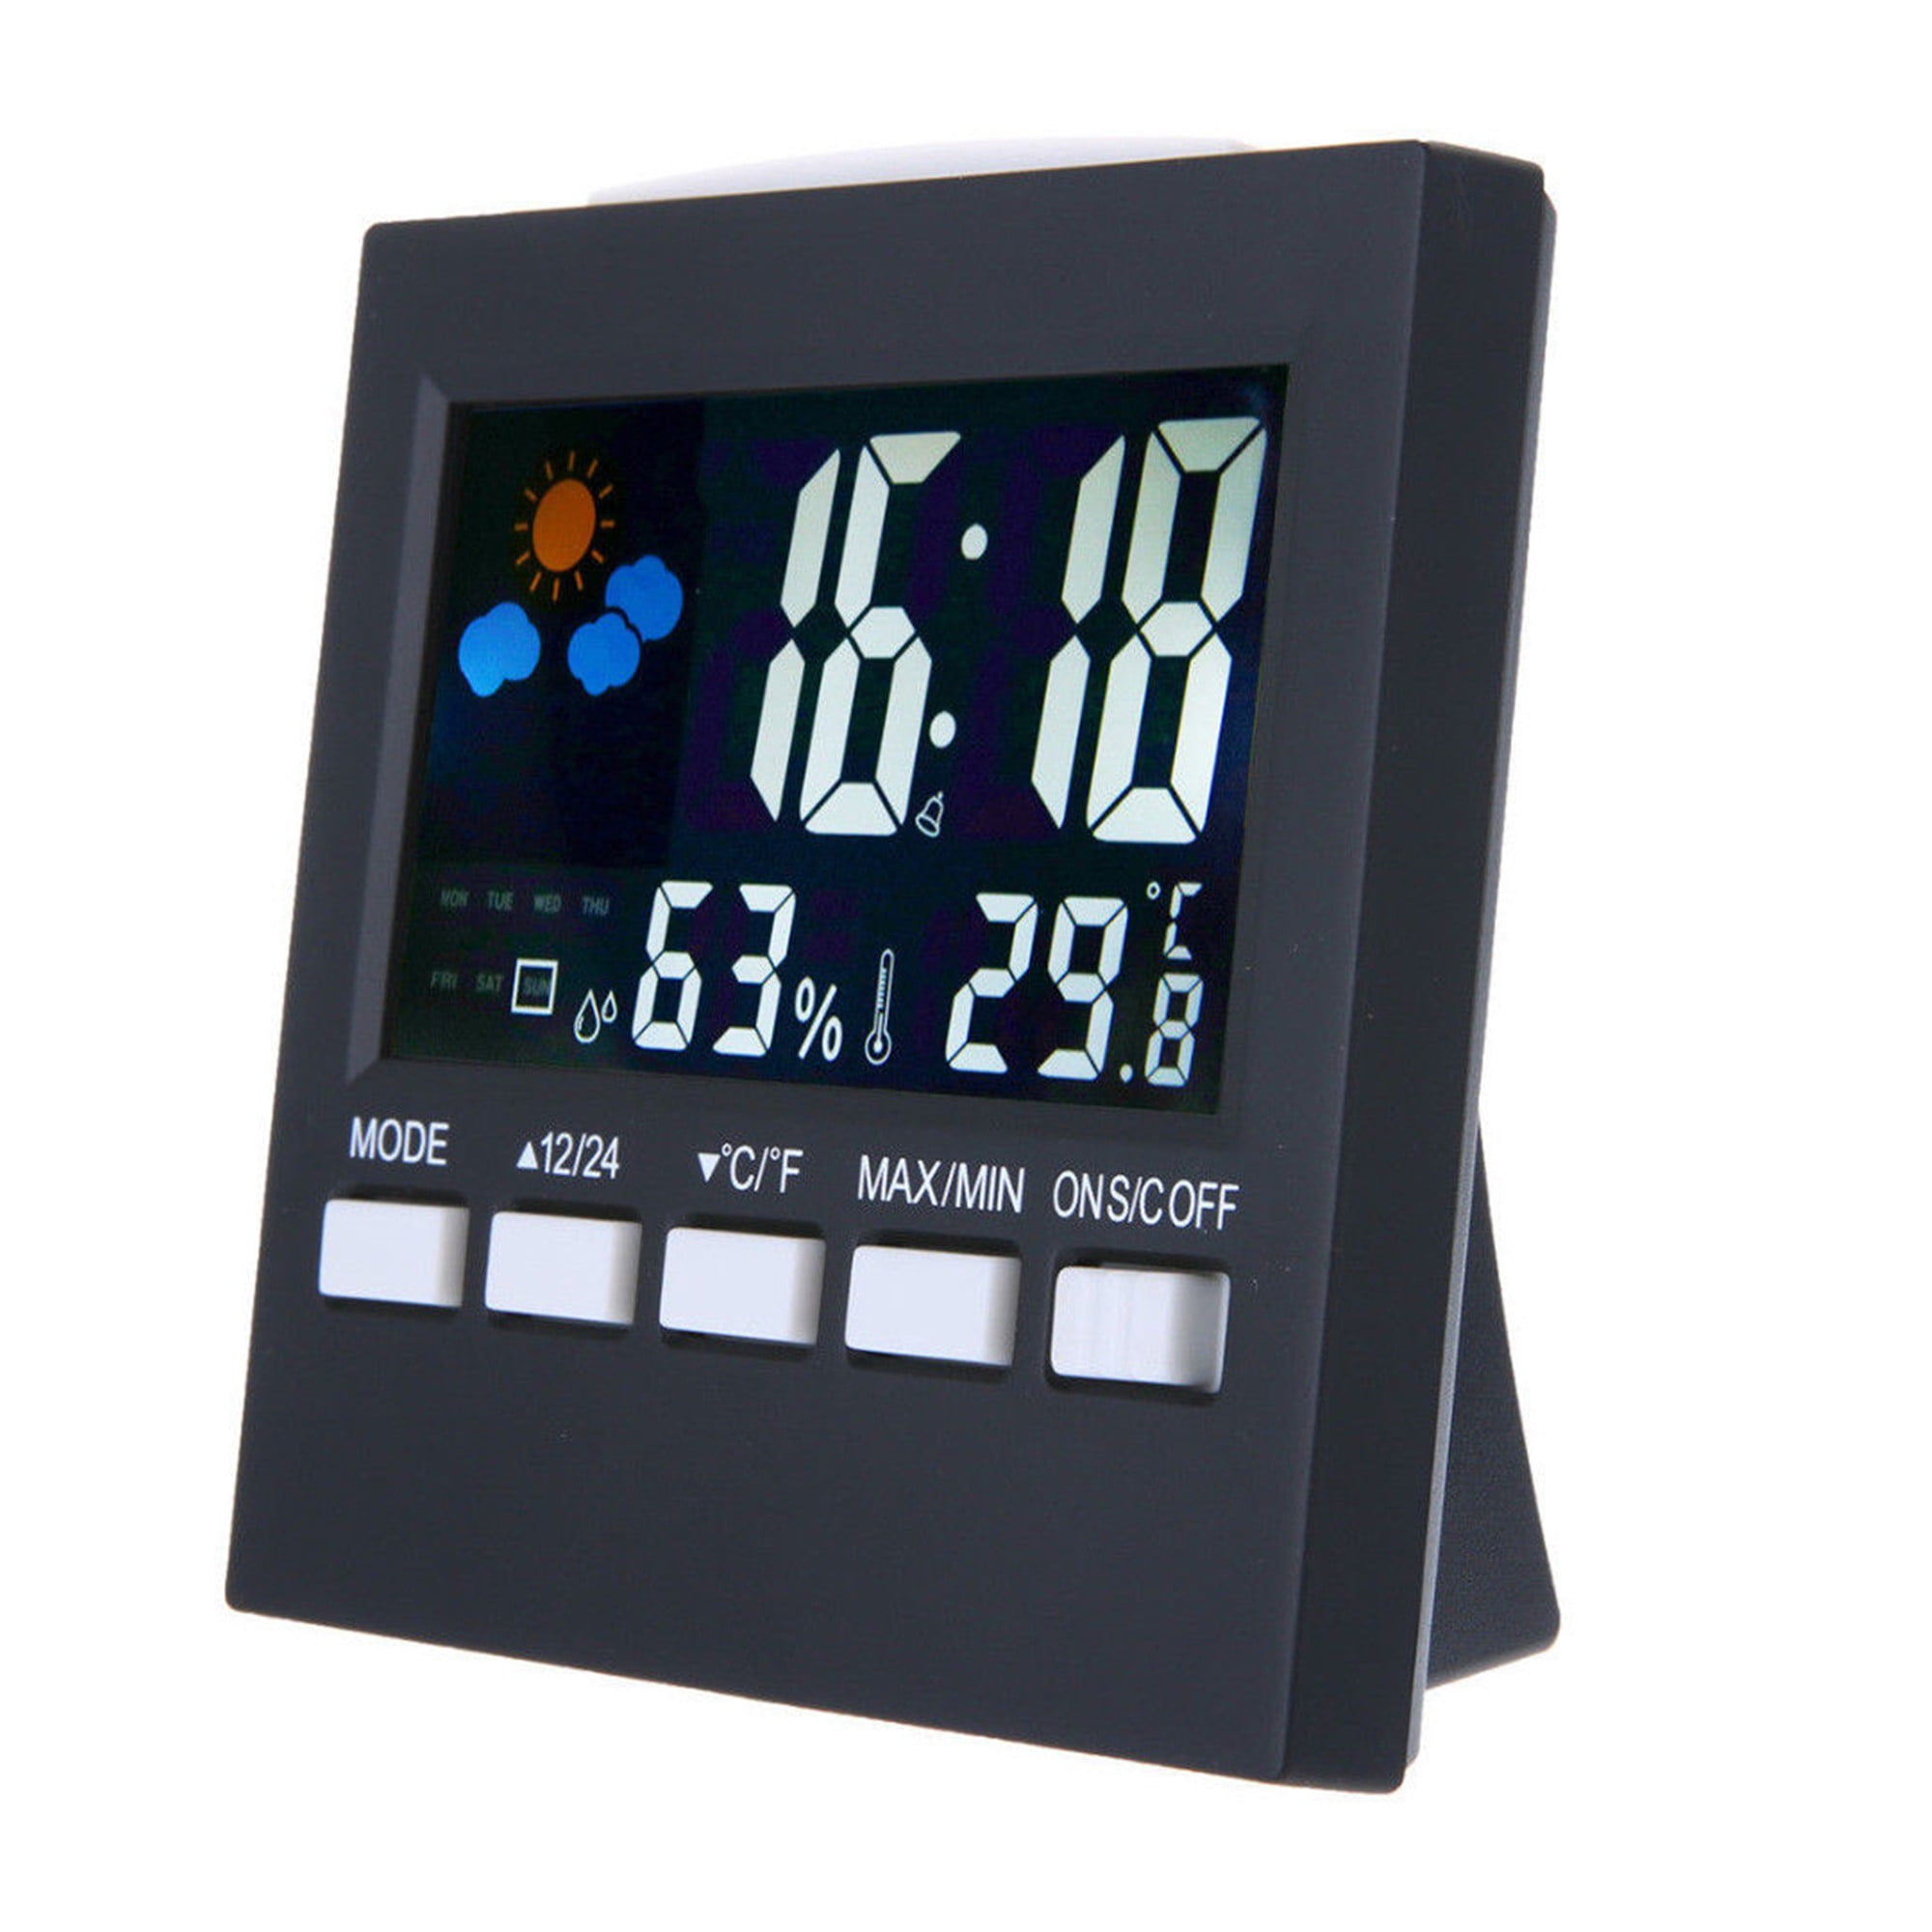 Digital Display Thermometer Humidity Alarm Clock Colorful LCD Calendar Weather 